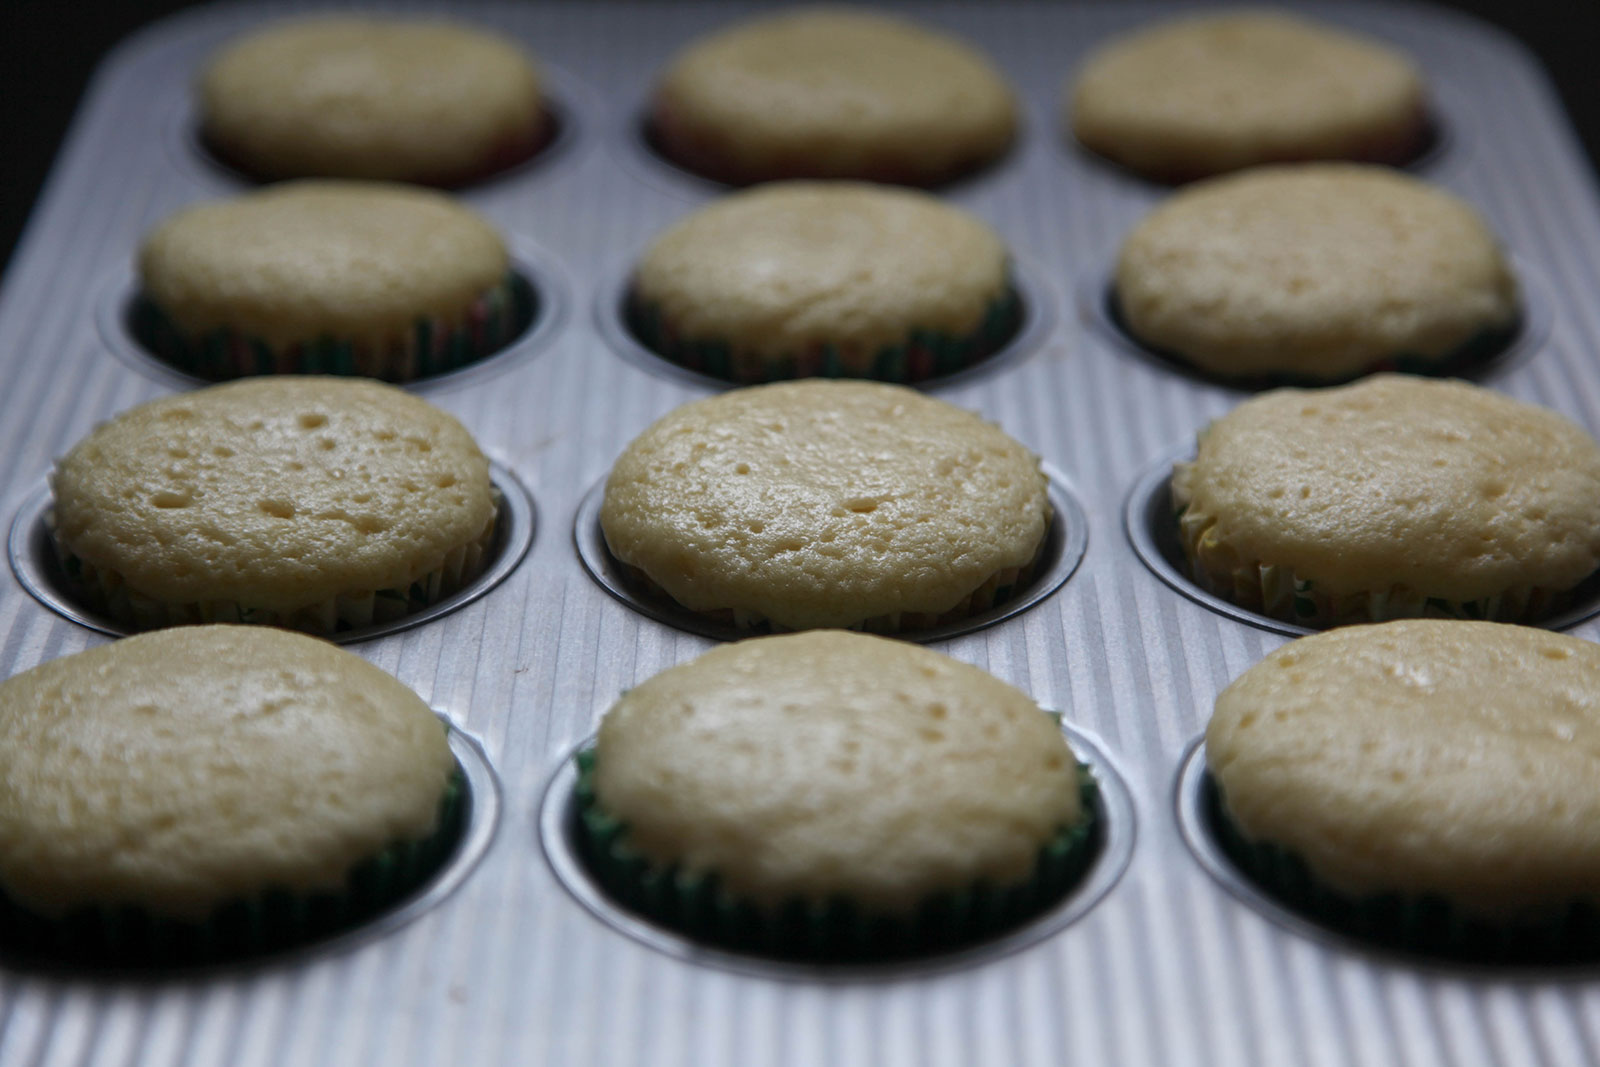 Moist fluffy cupcakes just out of oven, resting in baking pan